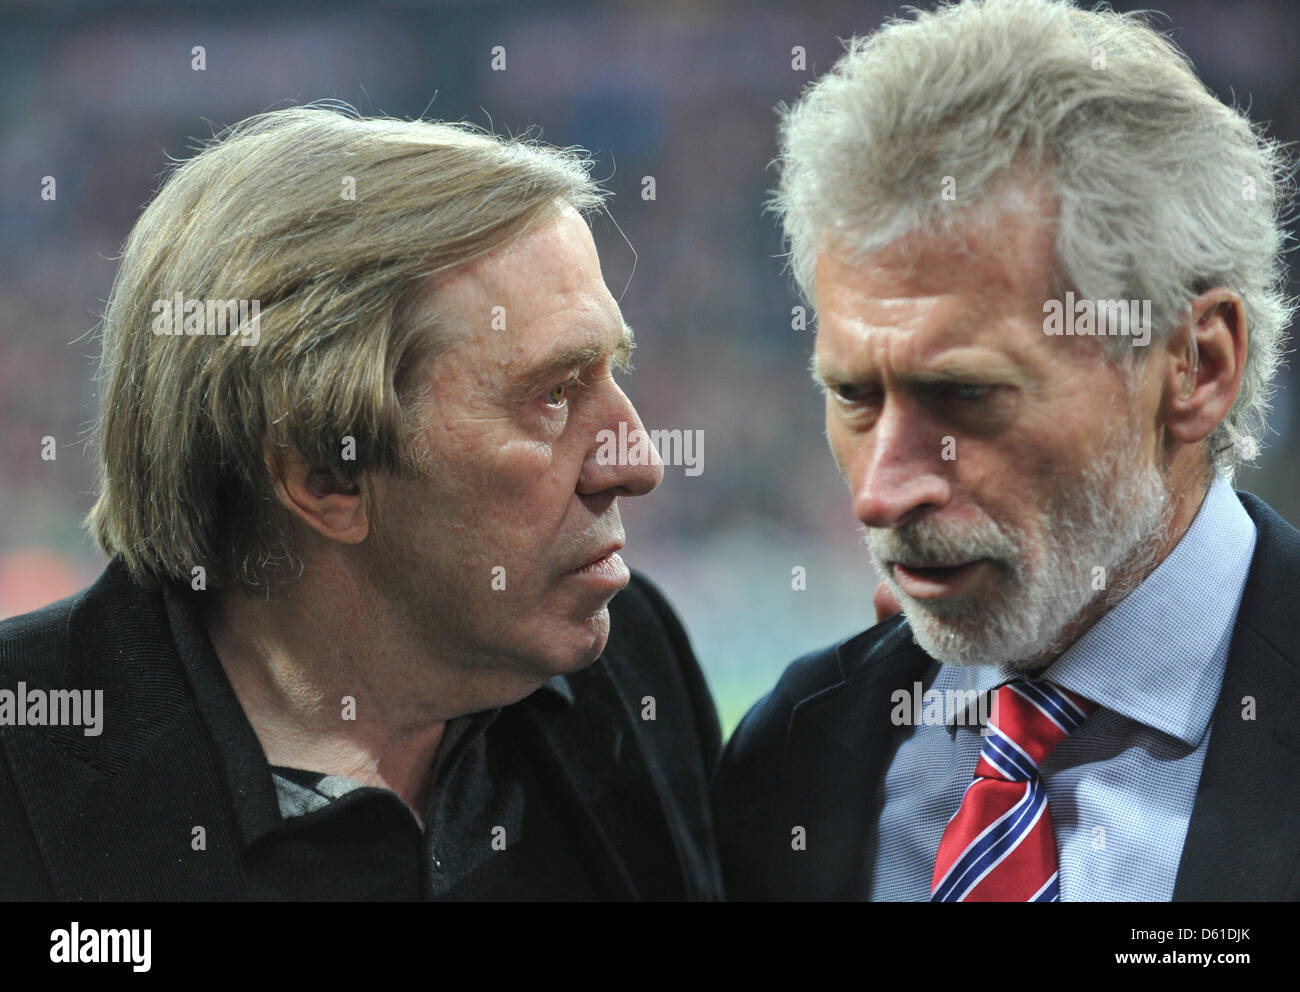 Former German soccer players Guenter Netzer (L) and Paul Breitner chat before the Champions League semi-final first leg soccer match between FC Bayern Munich and Real Madrid at the Allianz Arena in Munich, Germany, 17 April 2012. Photo: Andreas Gebert dpa/lby Stock Photo